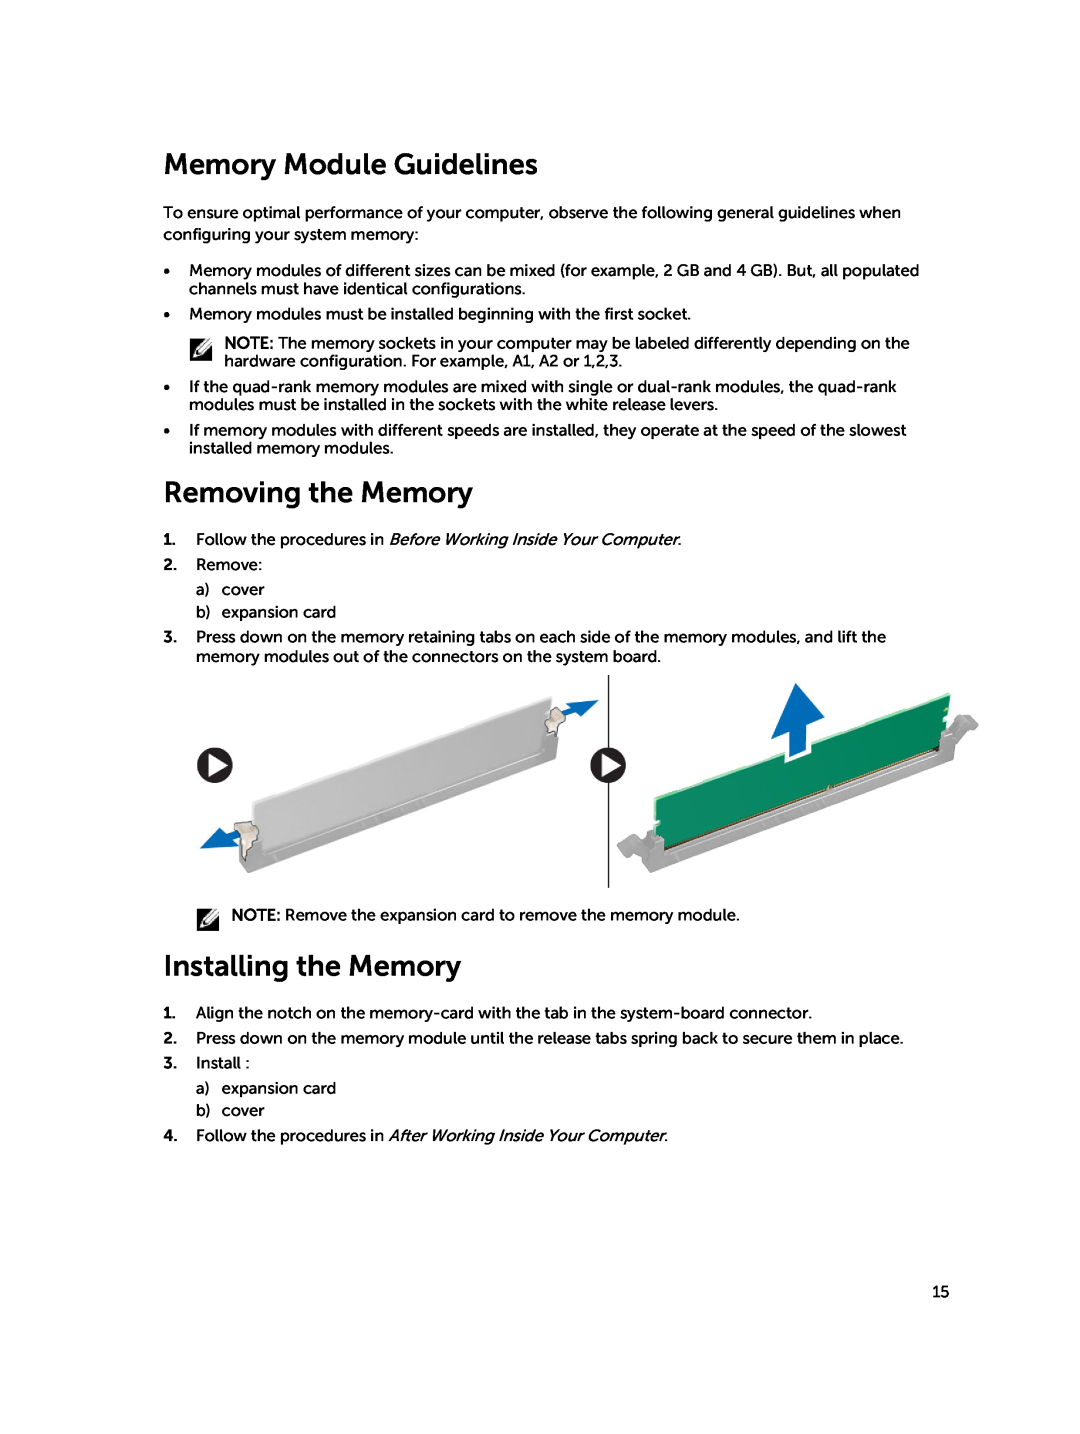 Dell D15M owner manual Memory Module Guidelines, Removing the Memory, Installing the Memory 